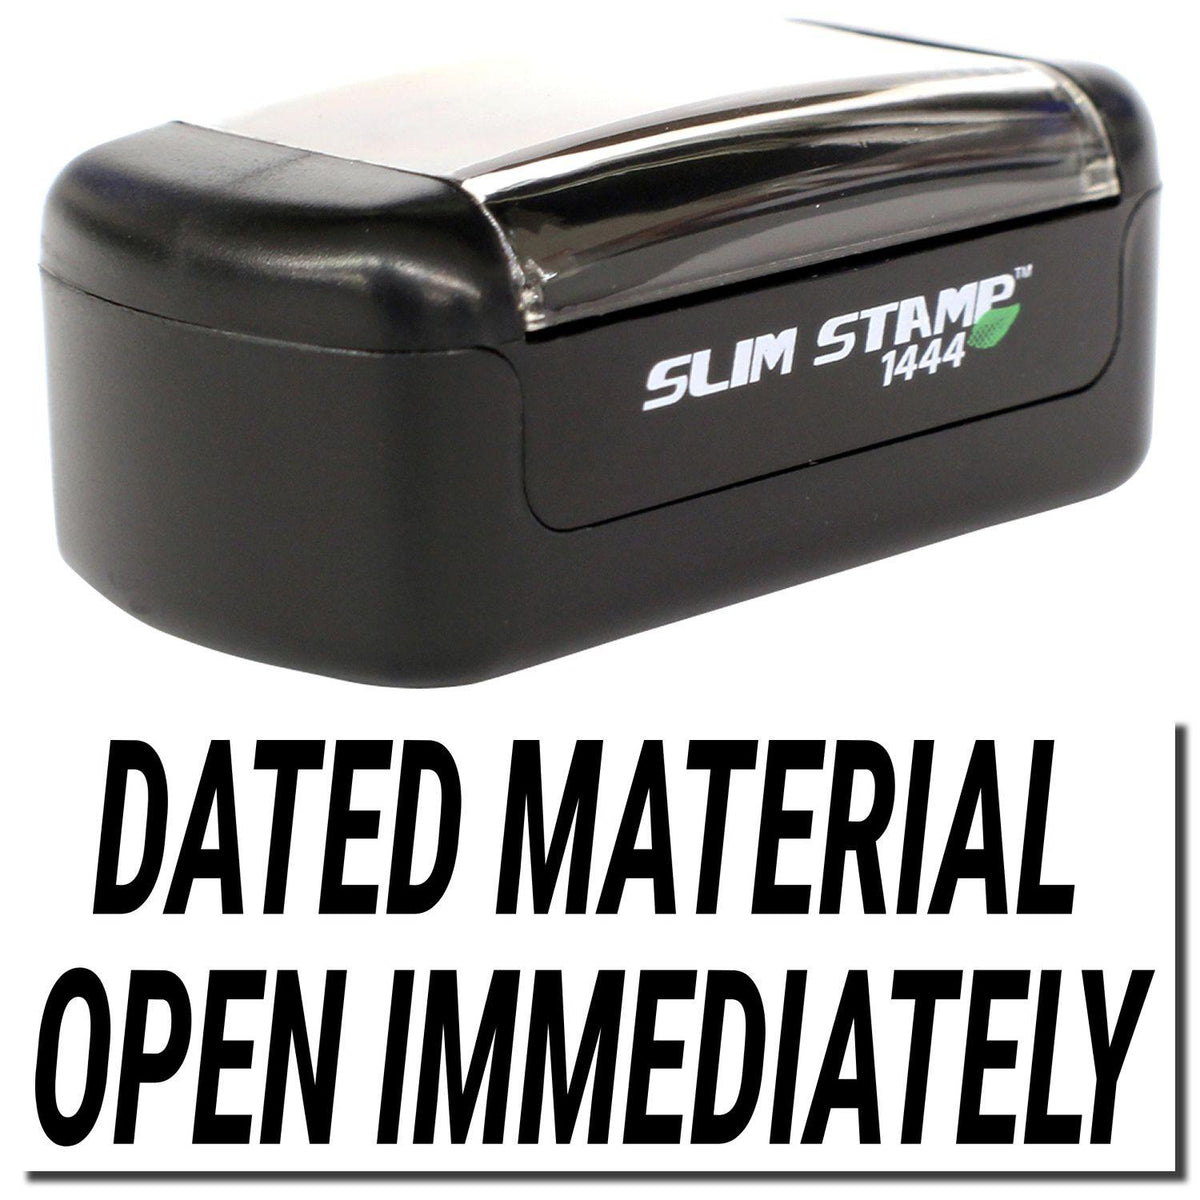 A stock office pre-inked stamp with a stamped image showing how the text &quot;DATED MATERIAL OPEN IMMEDIATELY&quot; is displayed after stamping.